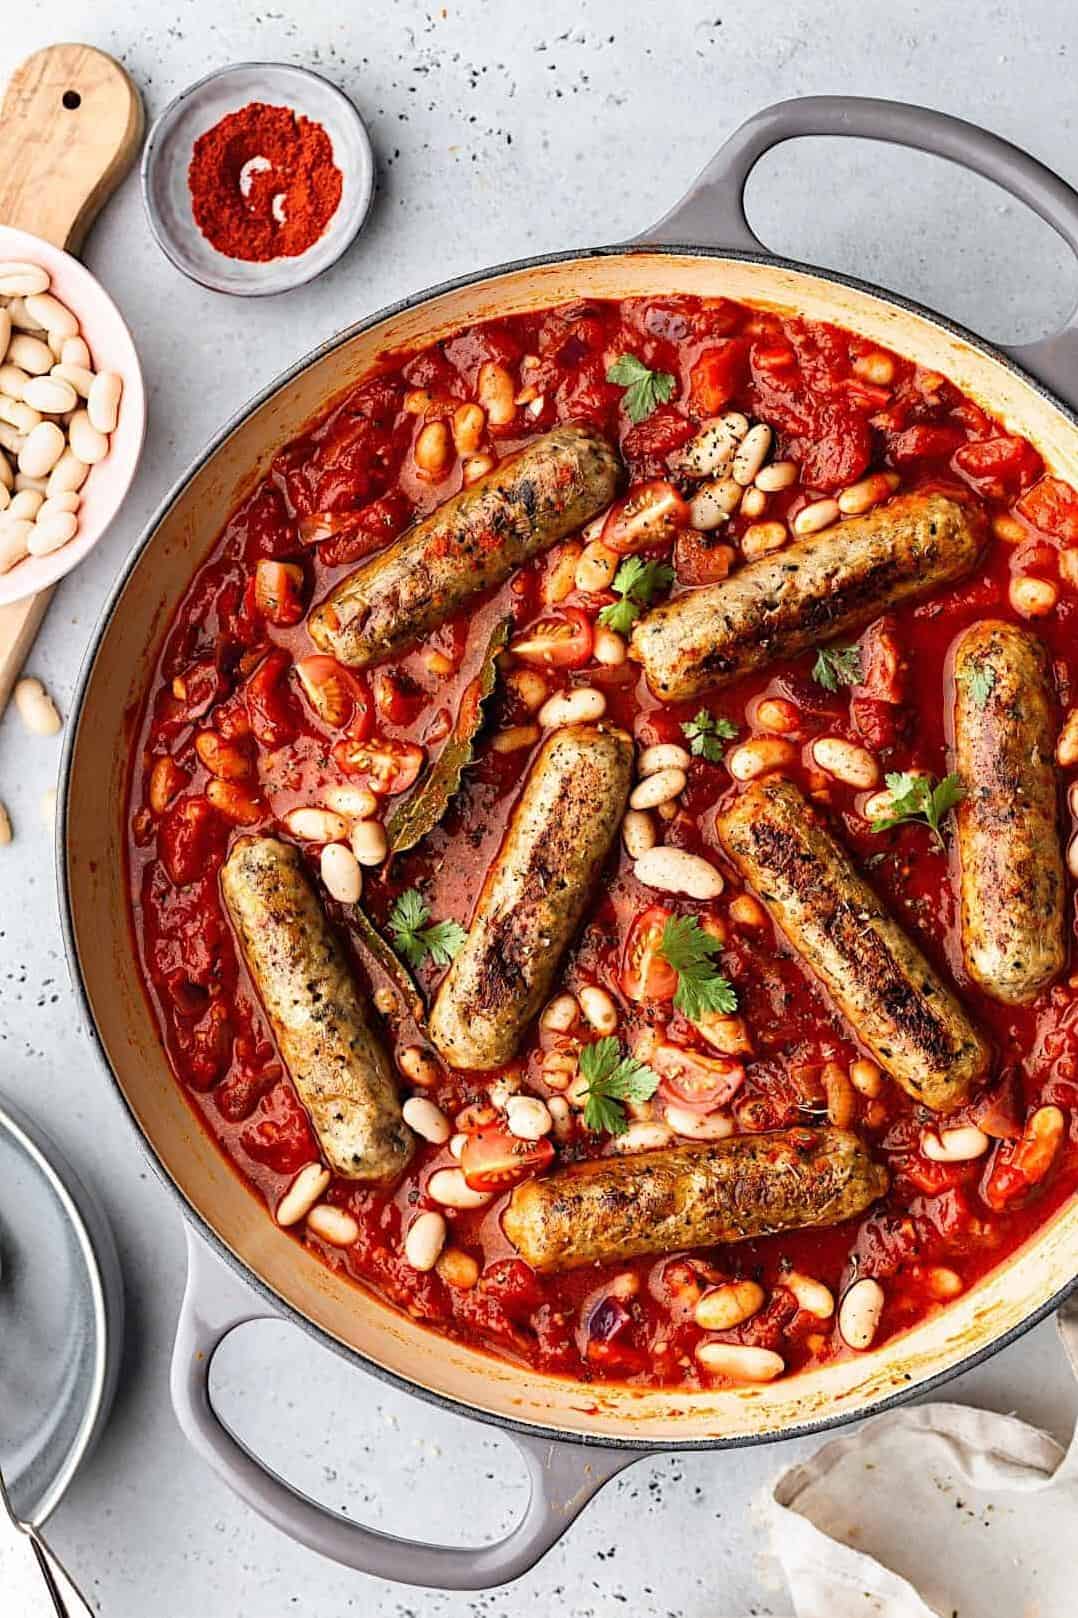  Beans as a base for sausages? Yes, it works! Try this recipe and see for yourself 🌱👌